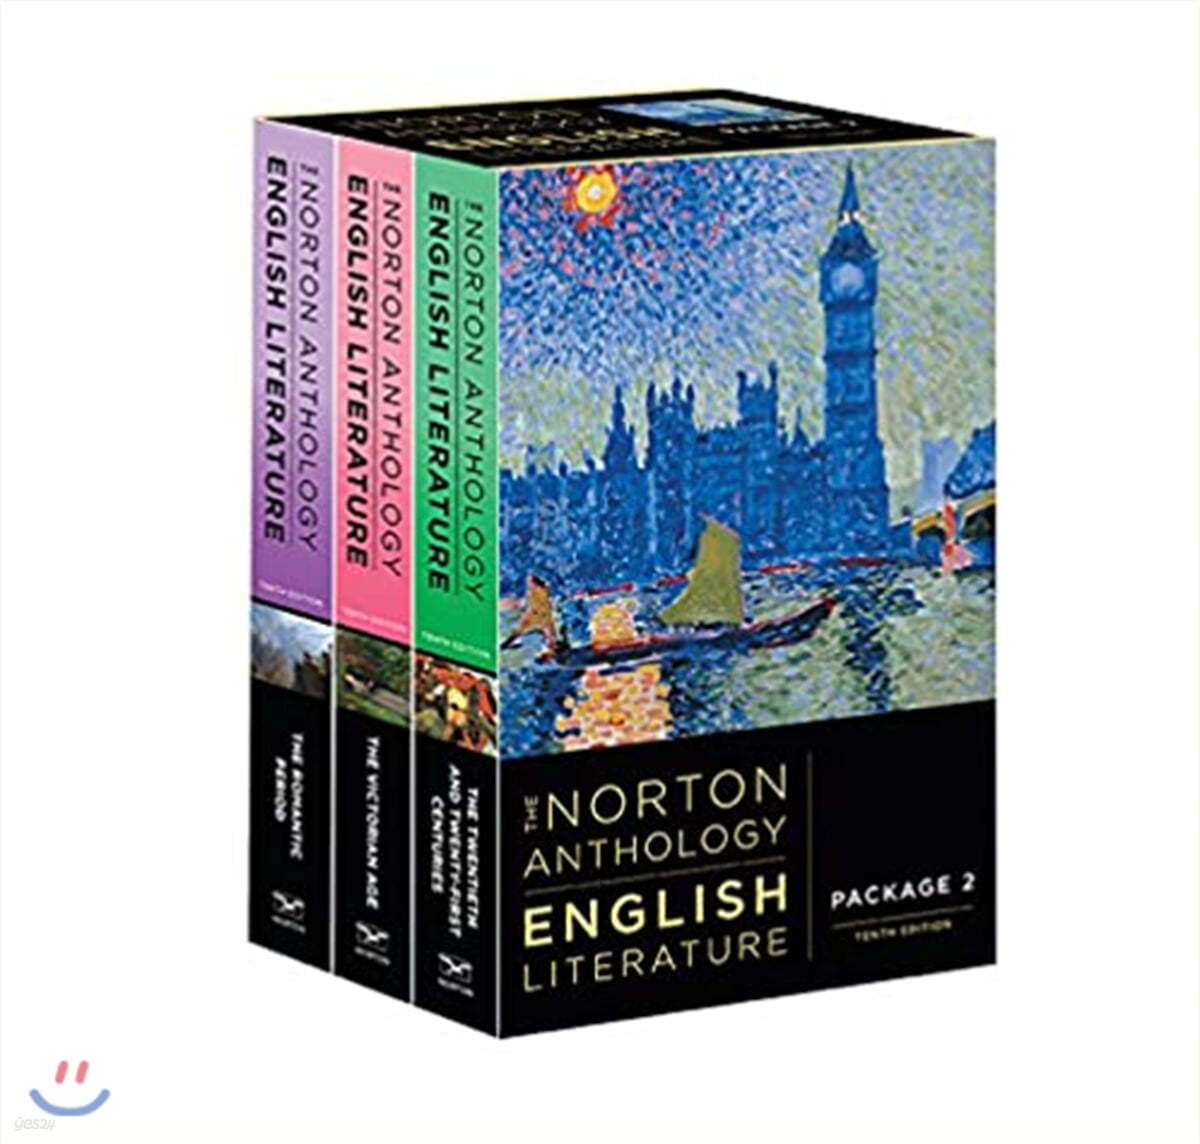 The Norton Anthology of English Literature 2 (Vol. Package 2: Volumes D, E, F)